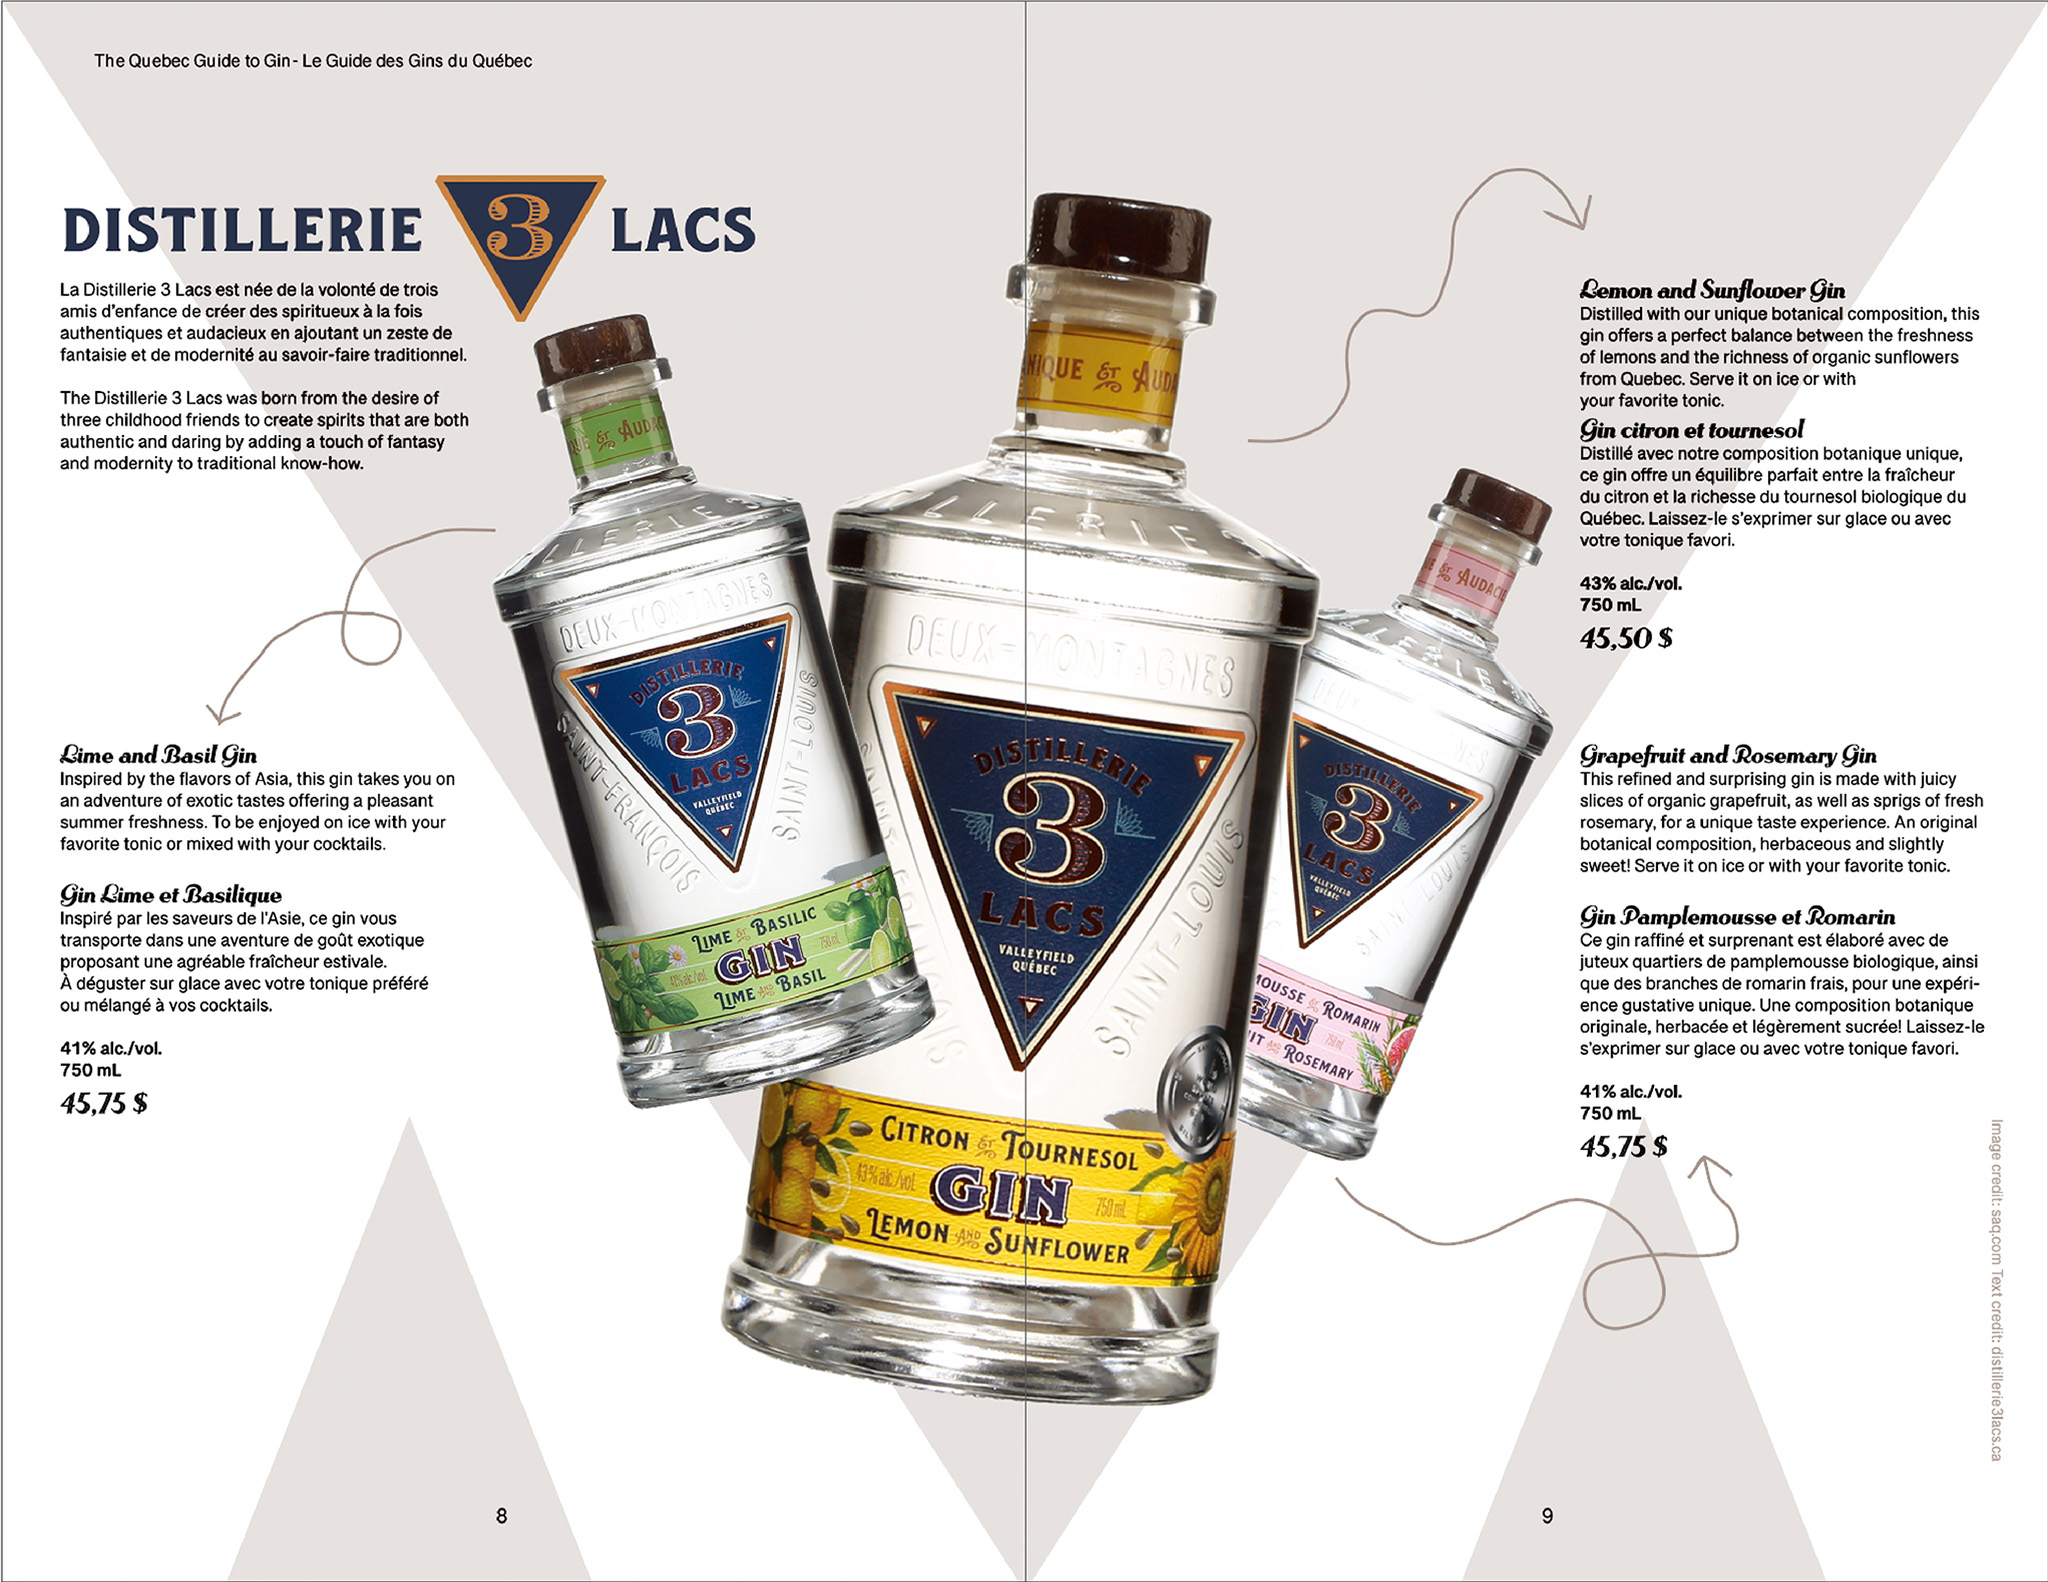 Two page catalog layout of Distillerie 3 Lacs Gin featuring logo, text about company and each featured flavor. At center of pages is three large bottles of Gin with different flavors. In the background are large triangle shapes.